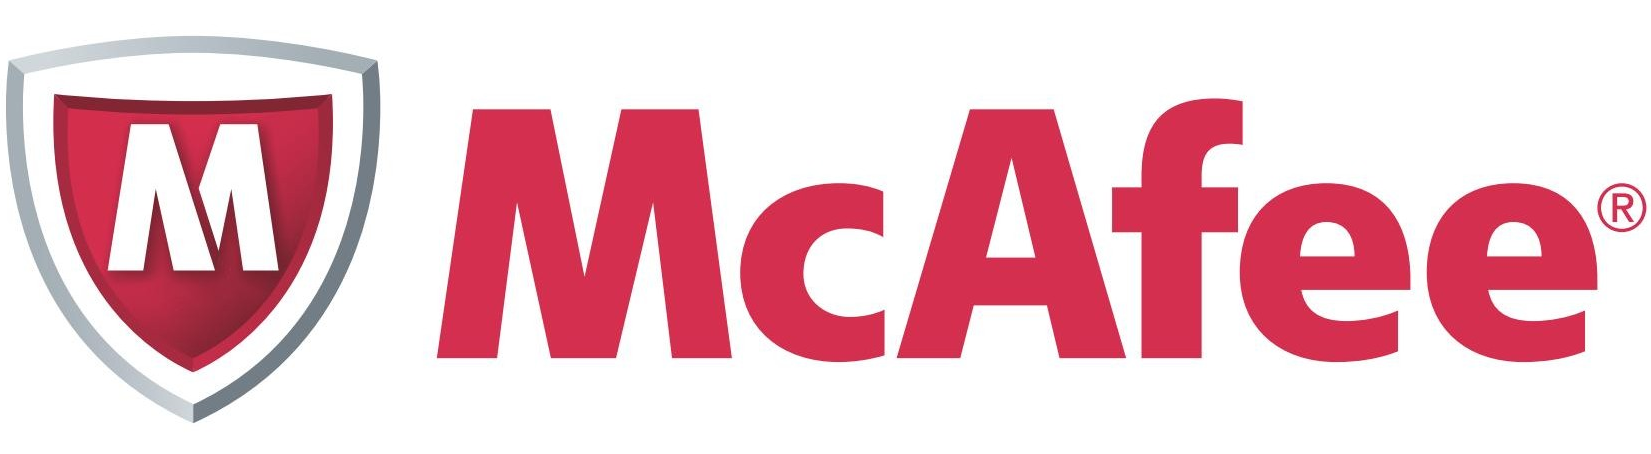 McAfee Education Services - Technology Training Course